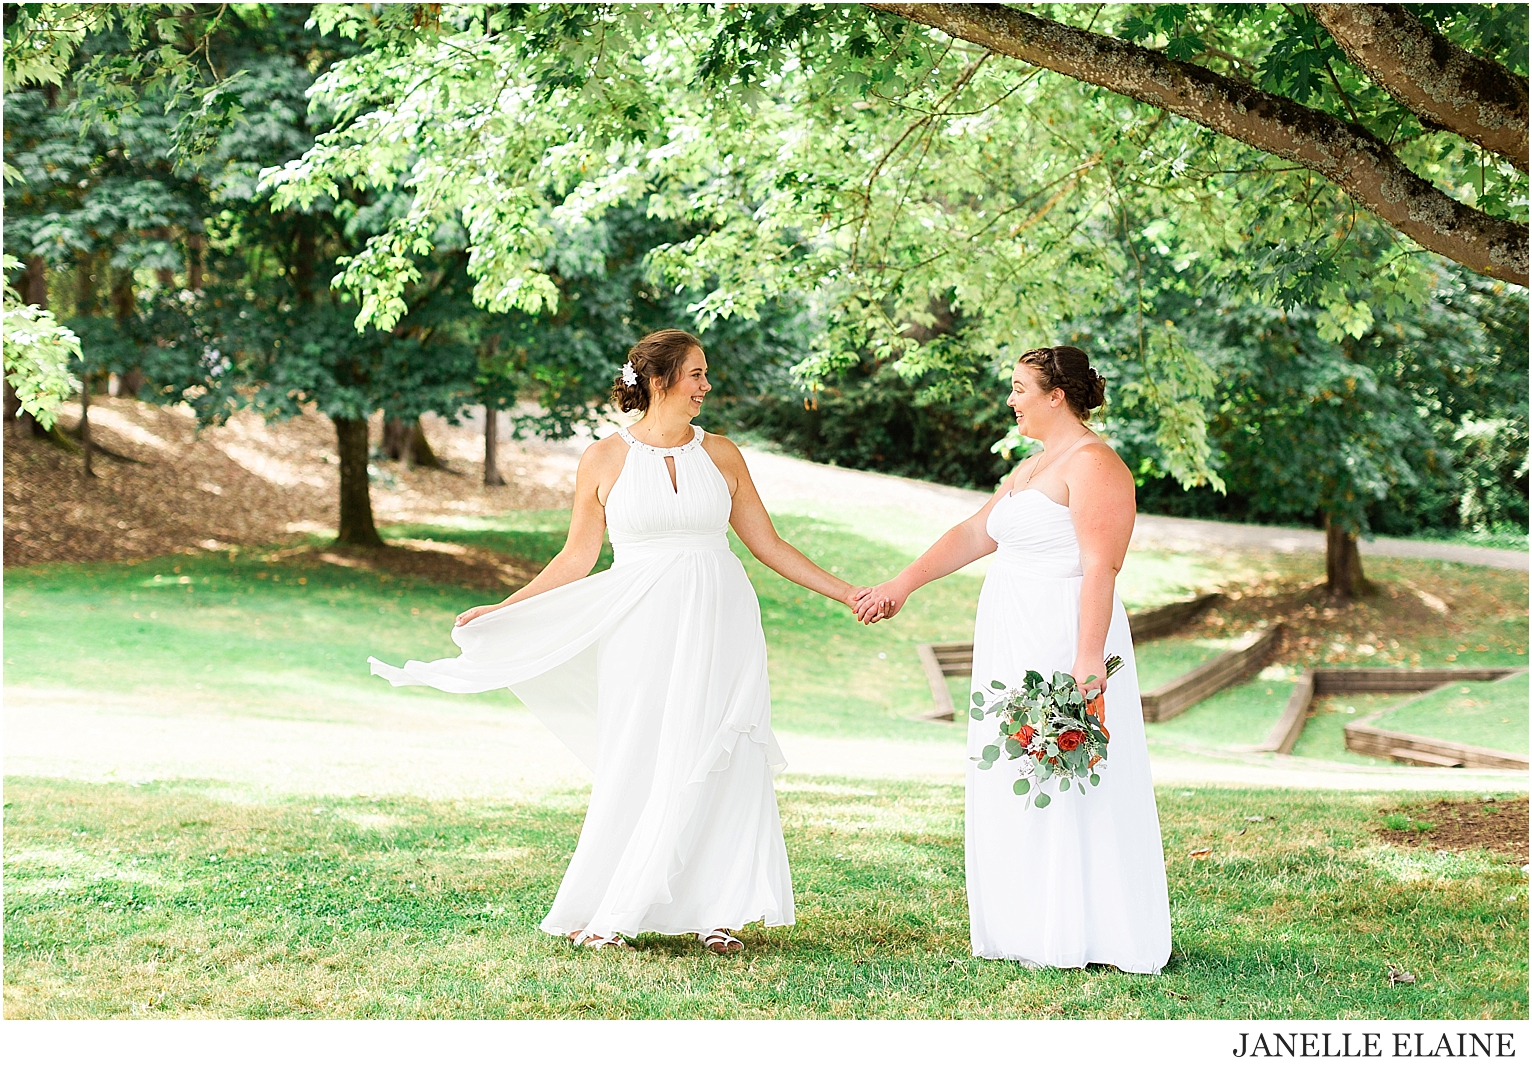 liz and christina lanning-first look and portraits-luther burbank park-janelle elaine photography-159.jpg